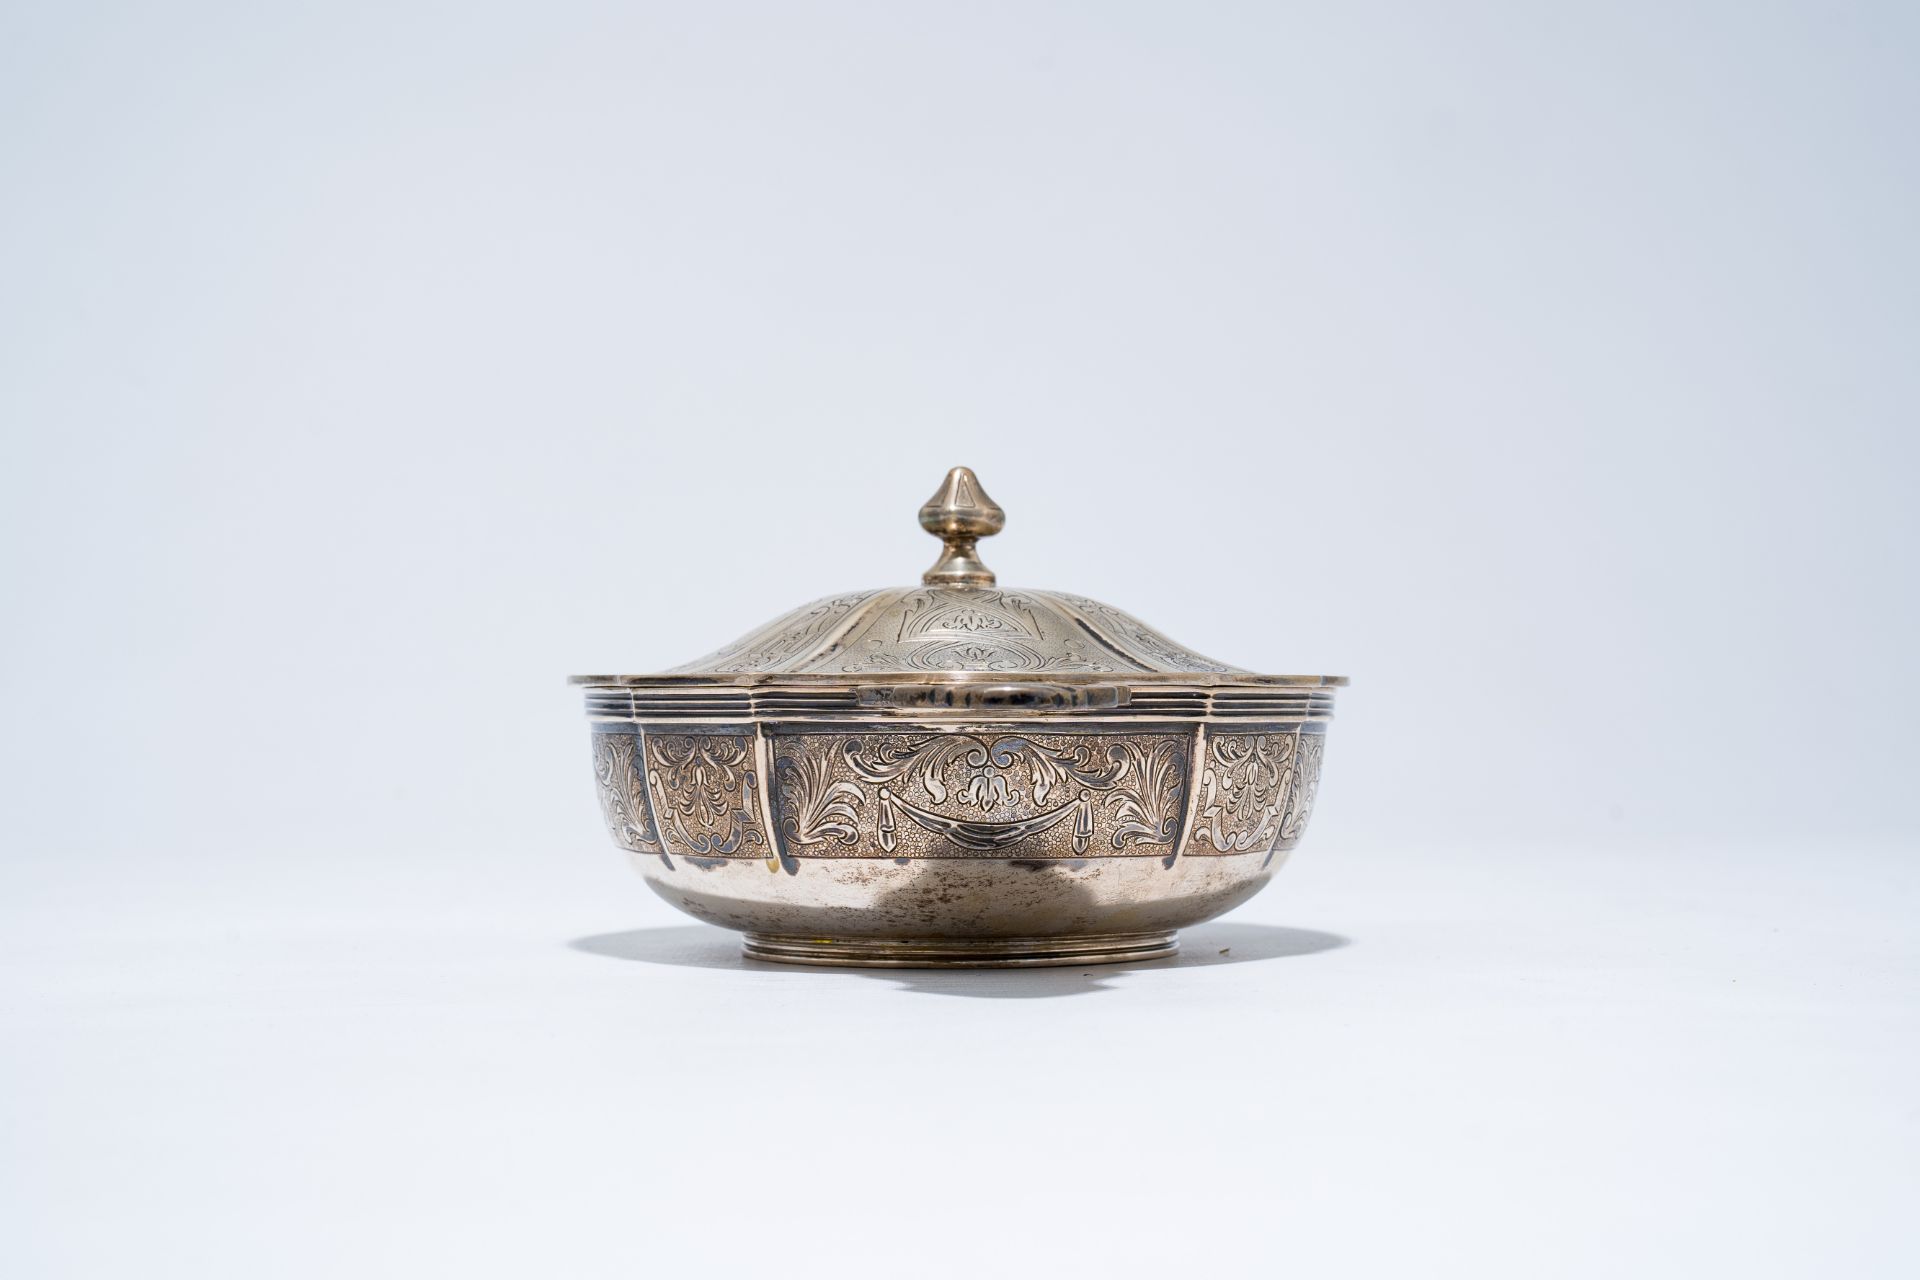 A Belgian silver bowl and cover with floral design, maker's mark Wolfers, 800/000, 20th C. - Image 6 of 9